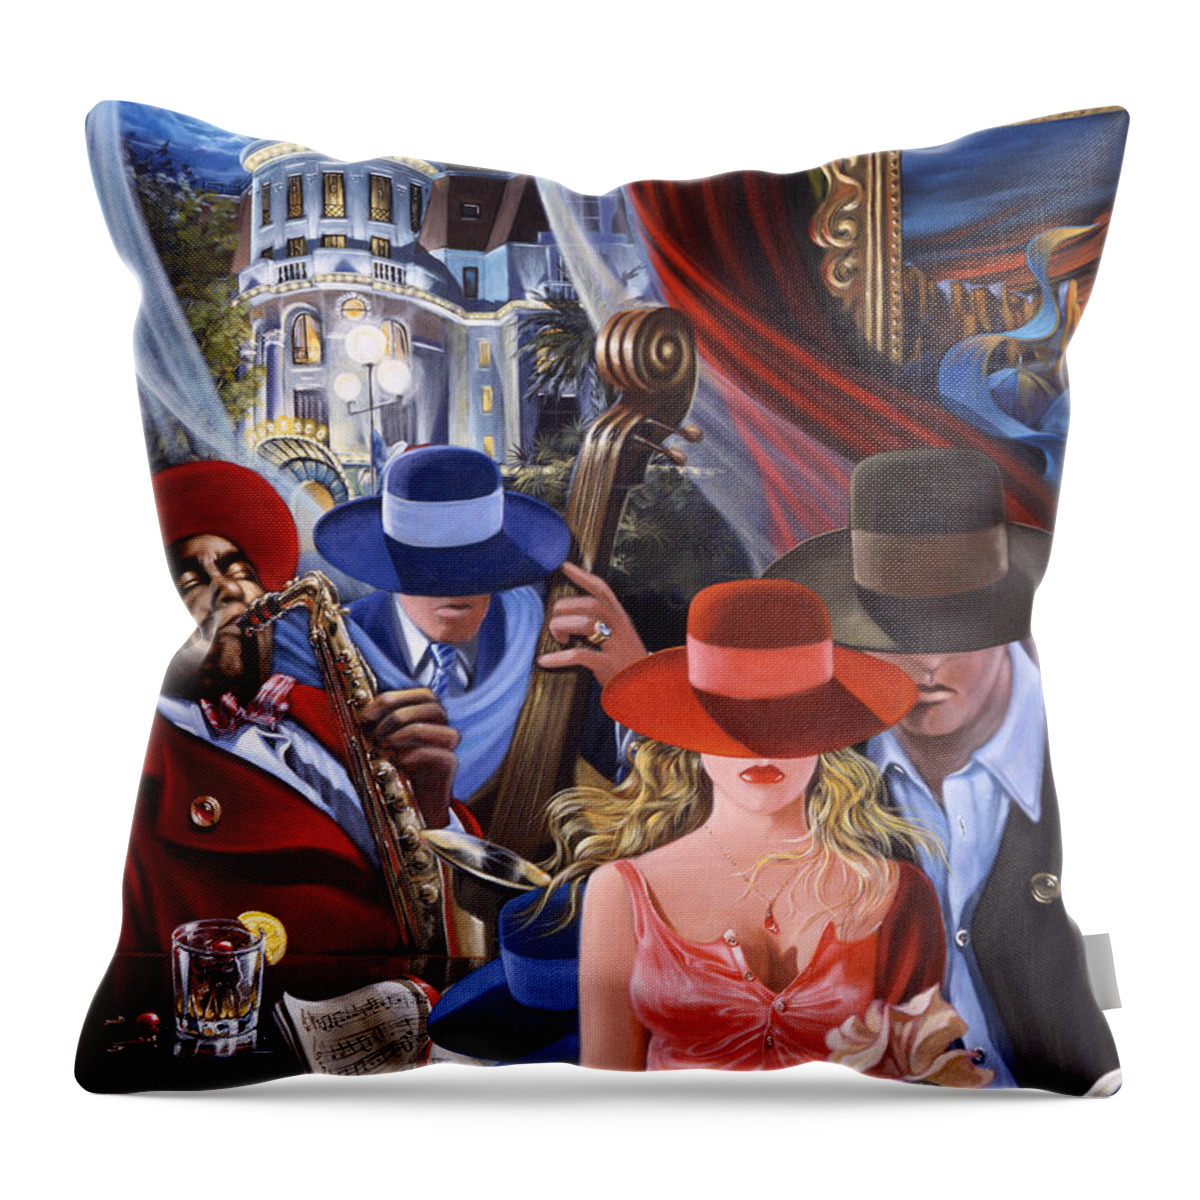 Metaphors Of Espionage Throw Pillow featuring the painting Avenue Of The Angels by Victor Ostrovsky